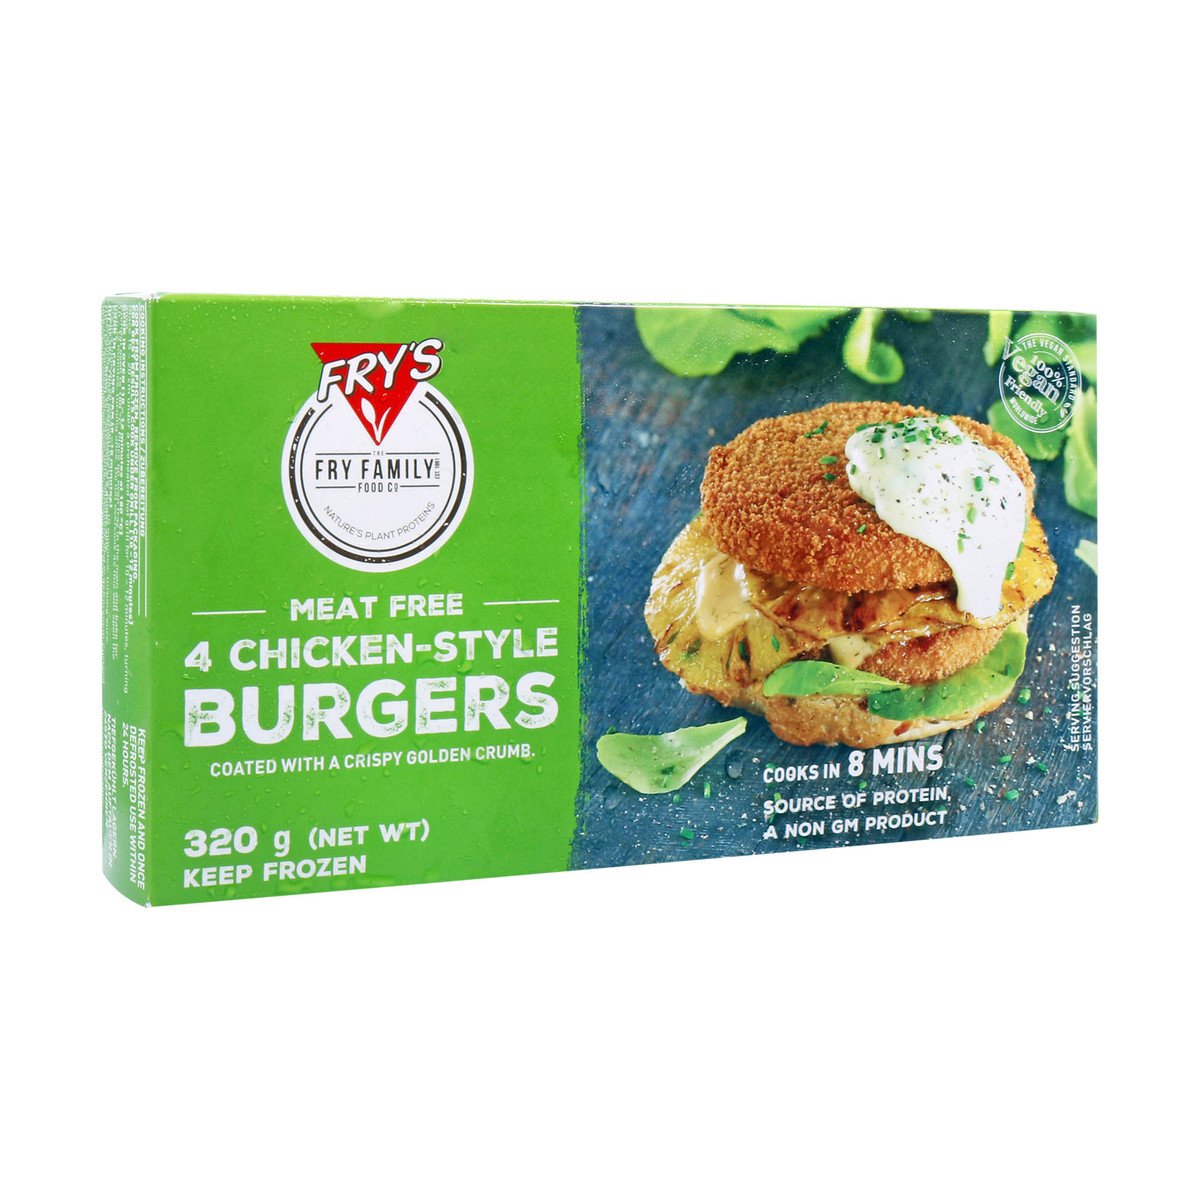 Fry's Family Meat Free 4 Chicken-Style Burgers 320 g